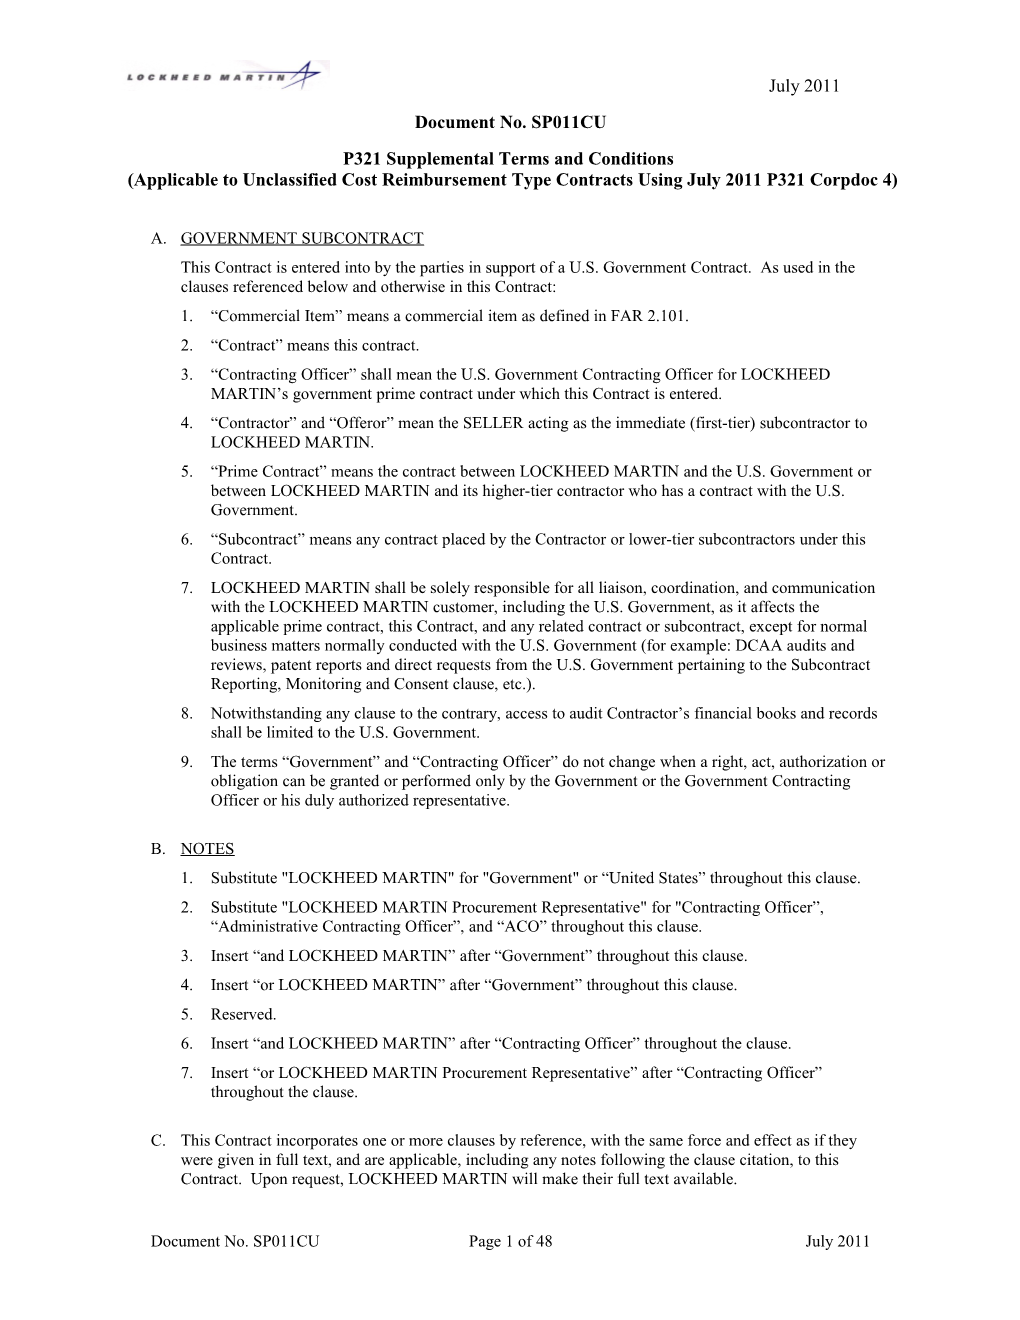 P987 Supplemental Terms and Conditions November 2009